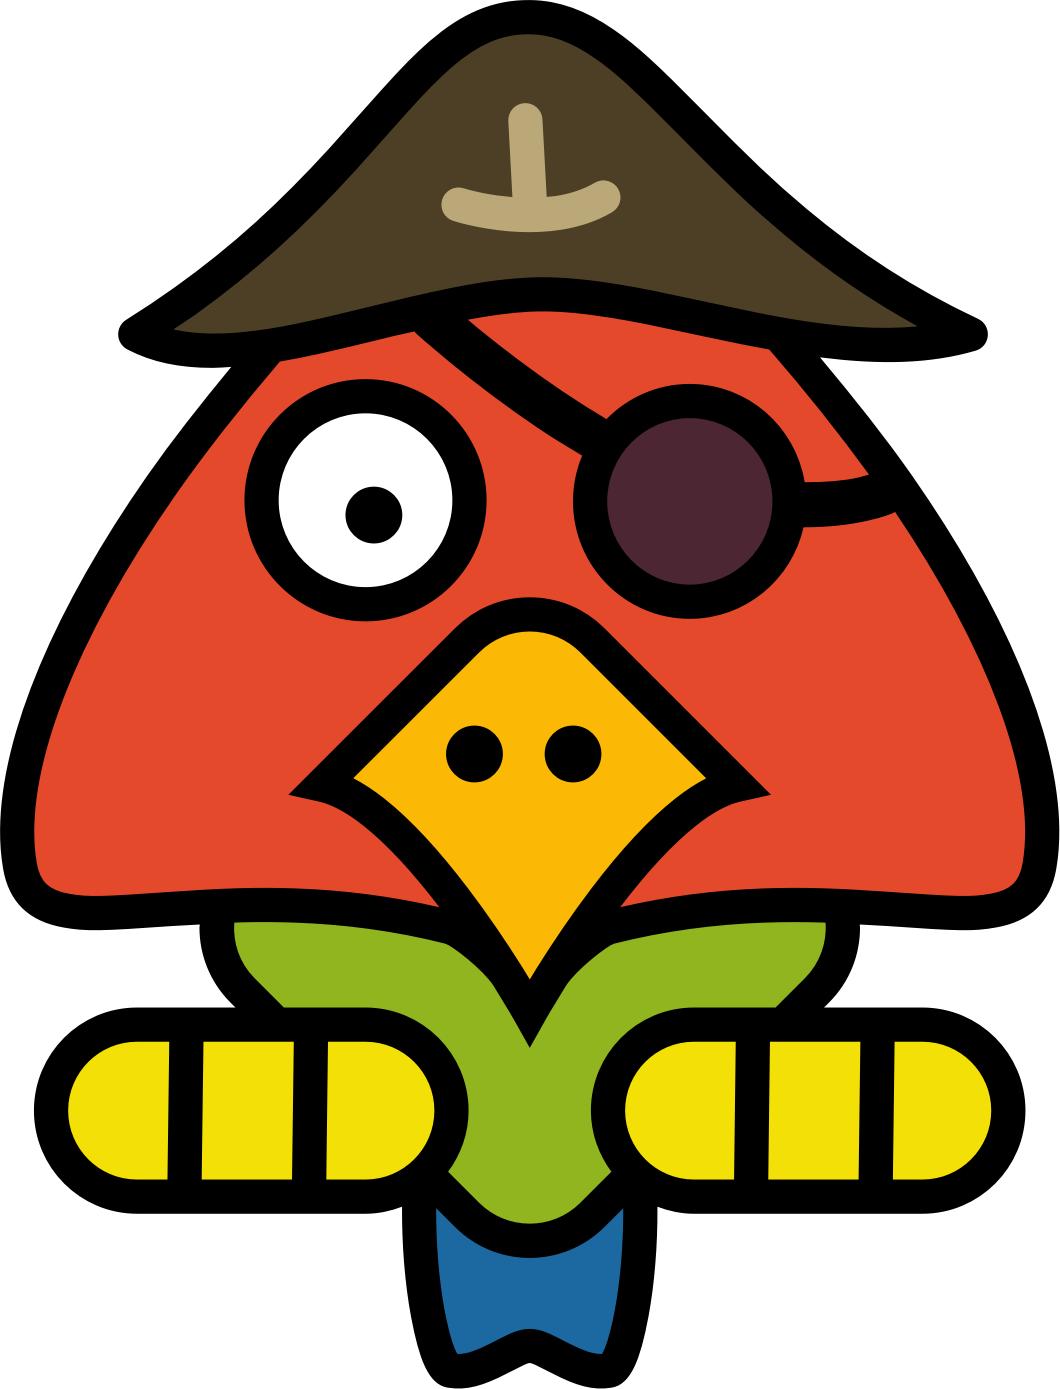 Pirate parrot png